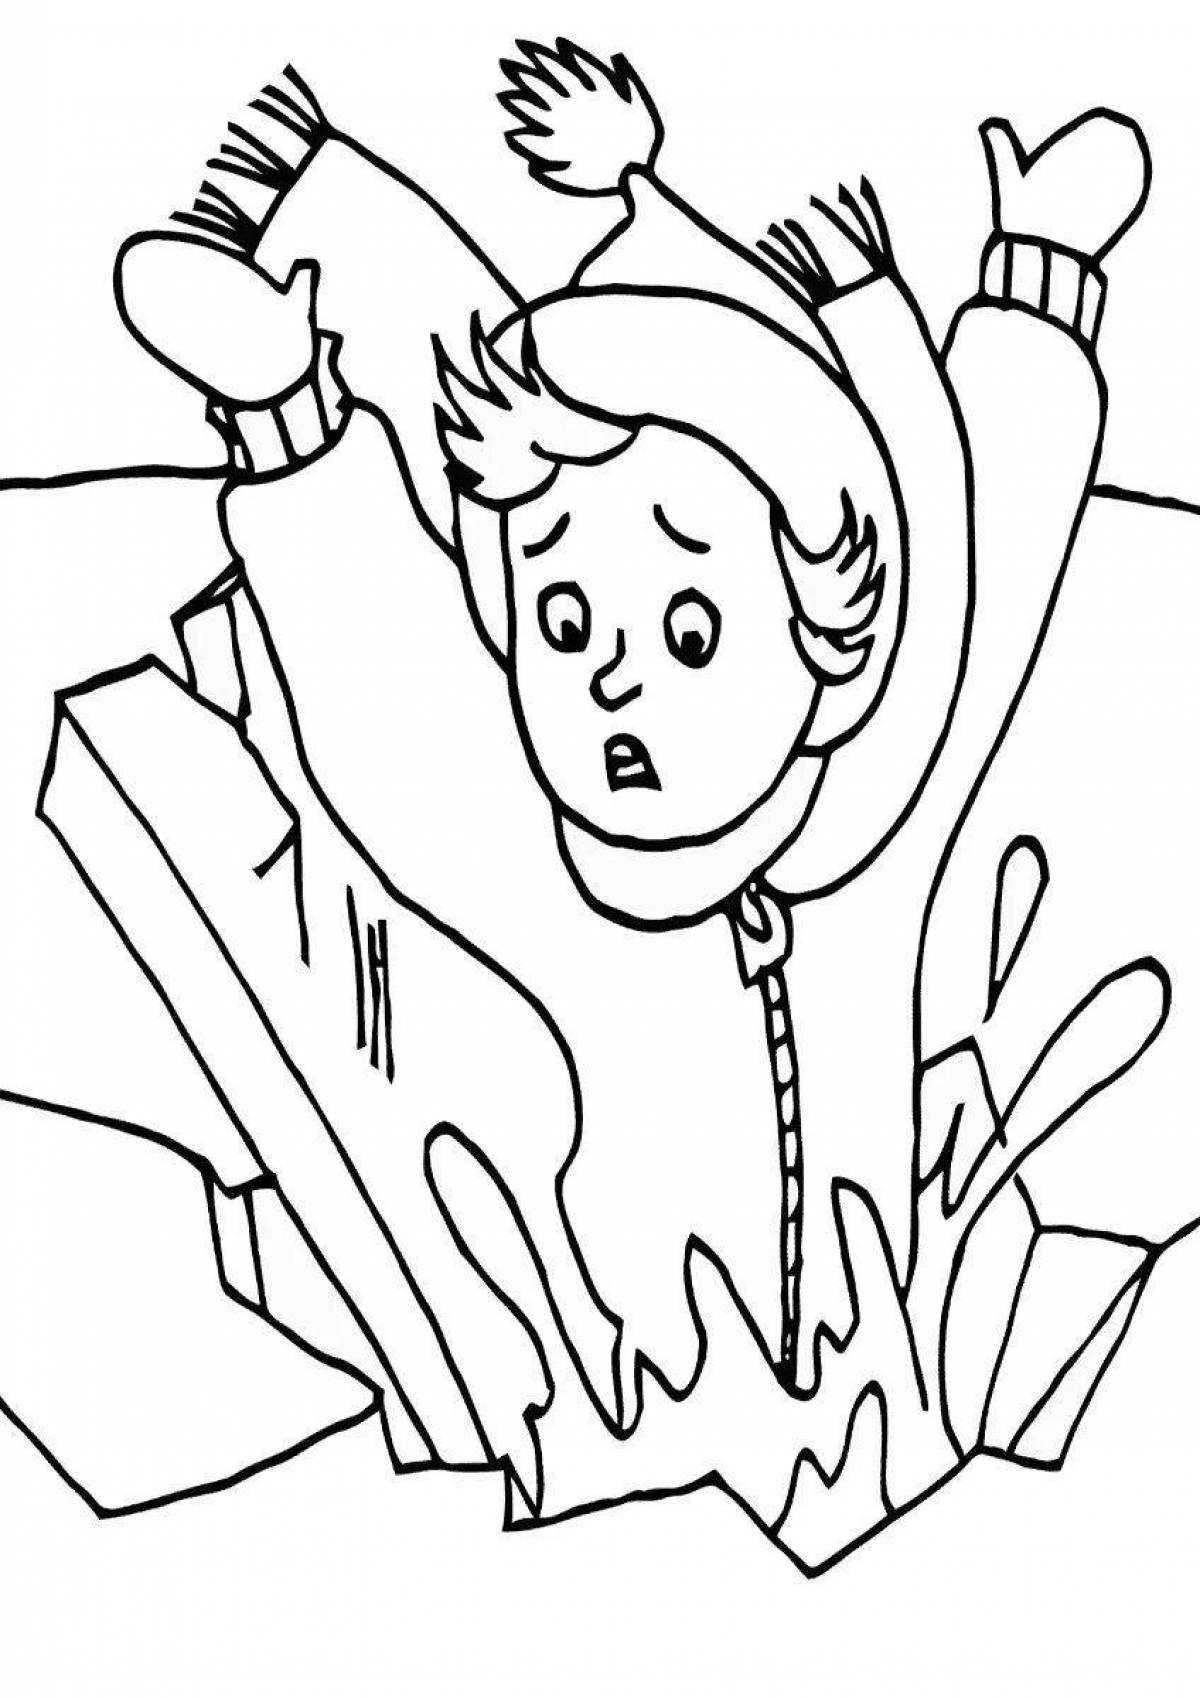 Happy ice safety coloring book for kids